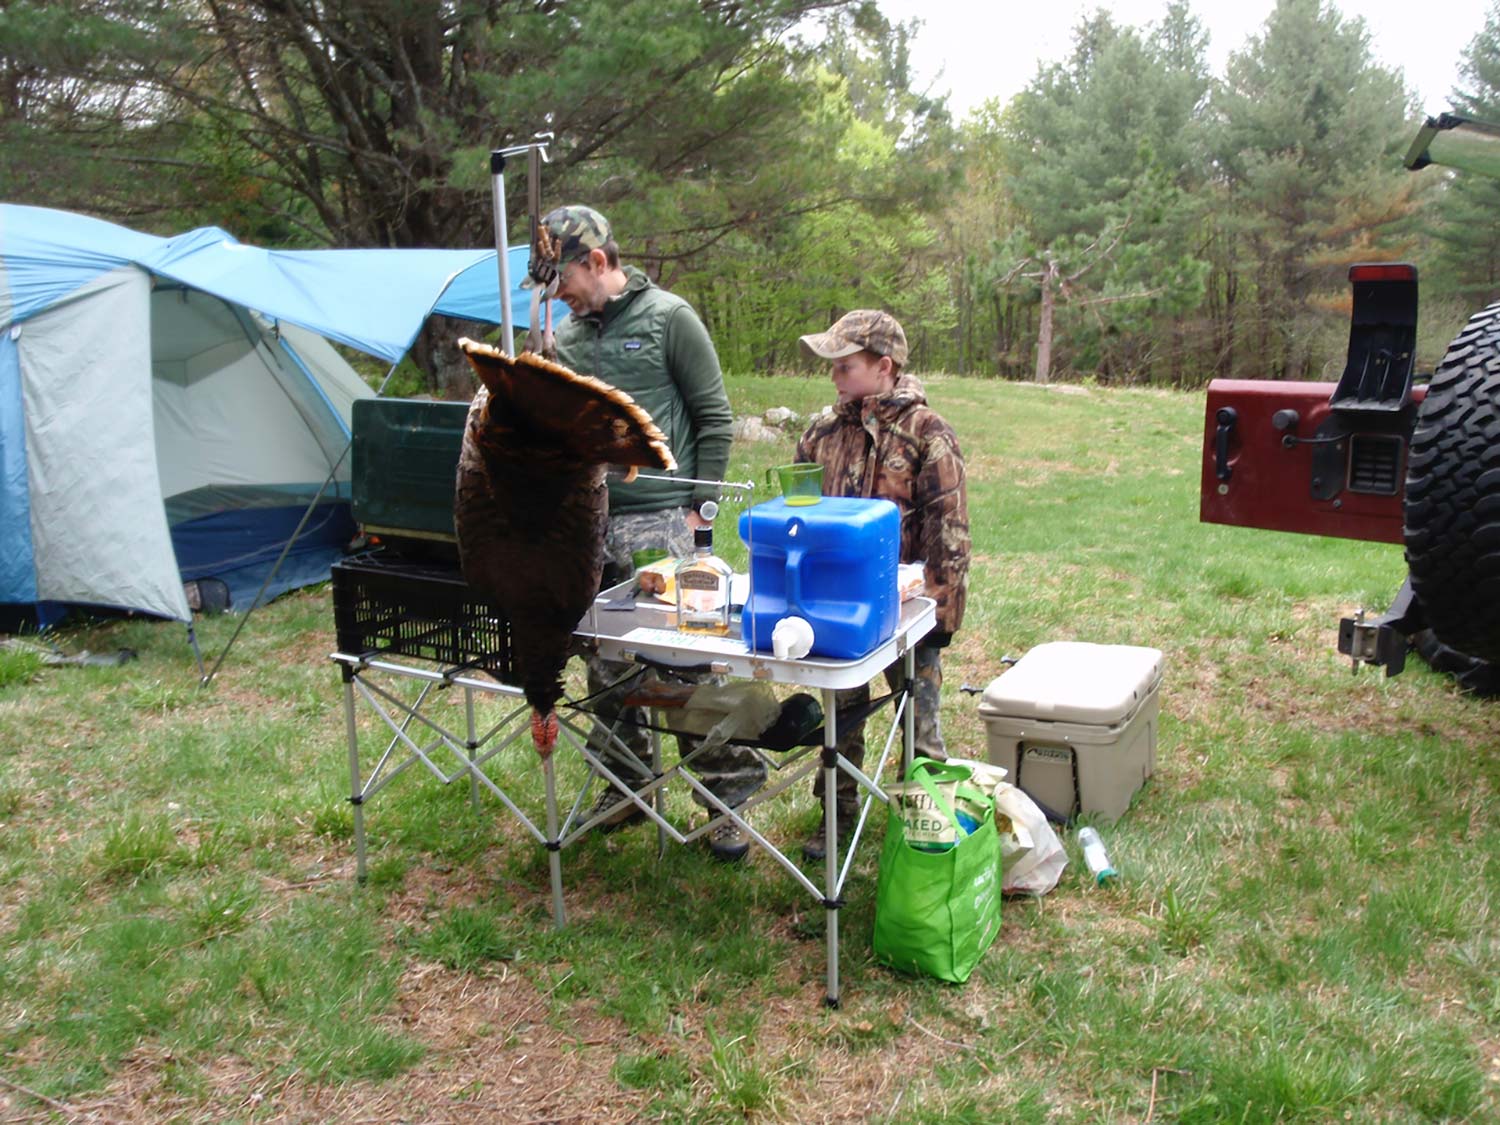 Two hunters cooking at a campground.